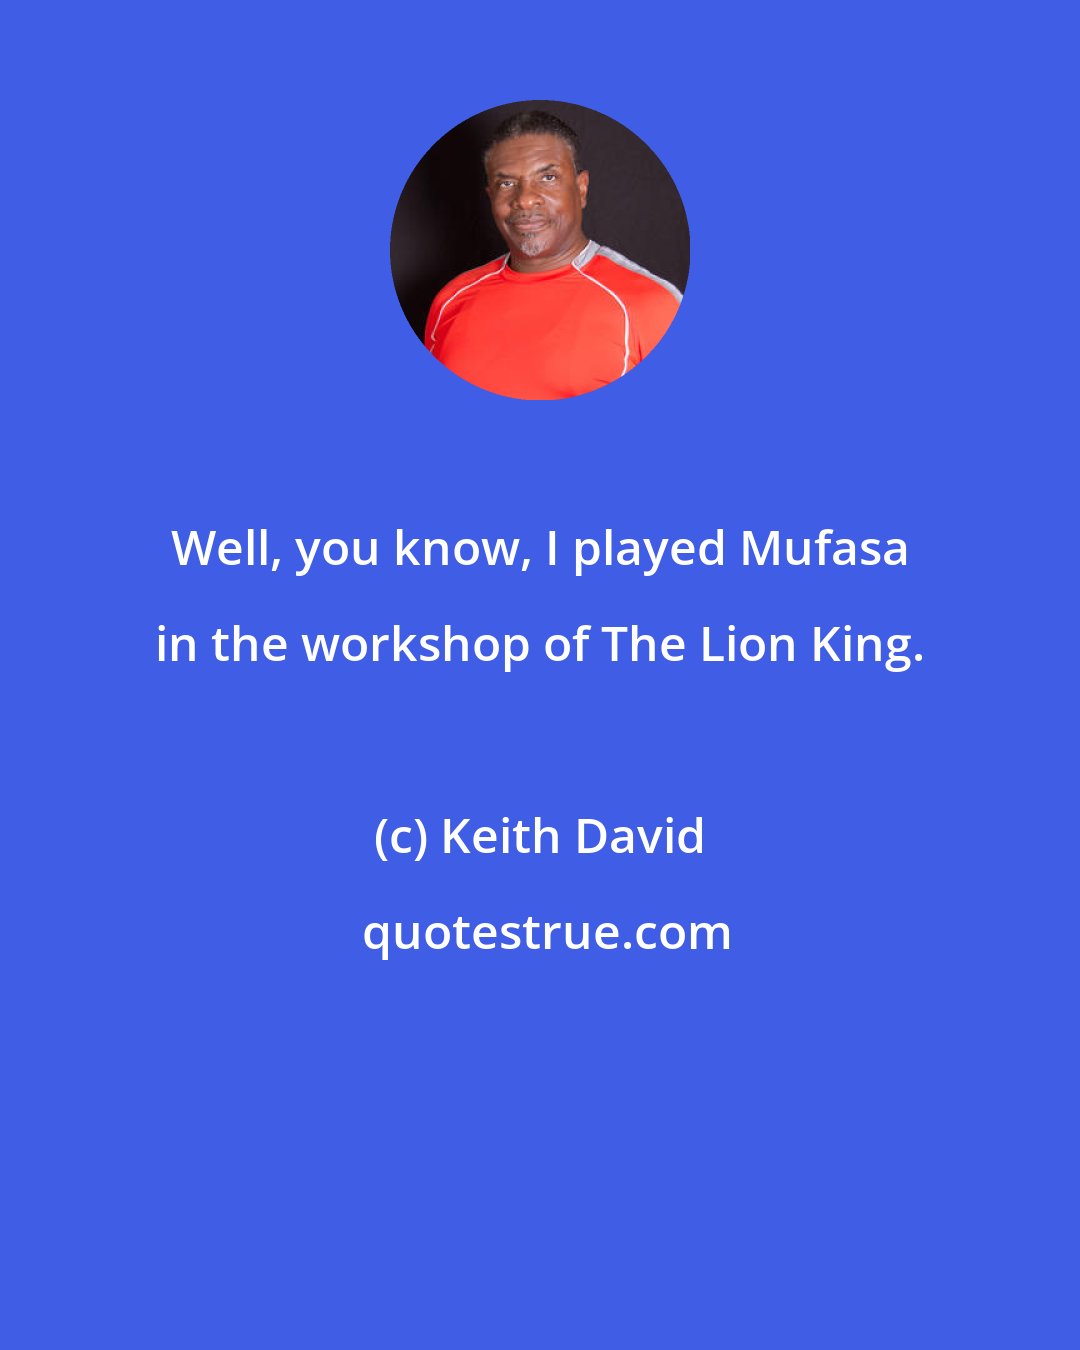 Keith David: Well, you know, I played Mufasa in the workshop of The Lion King.